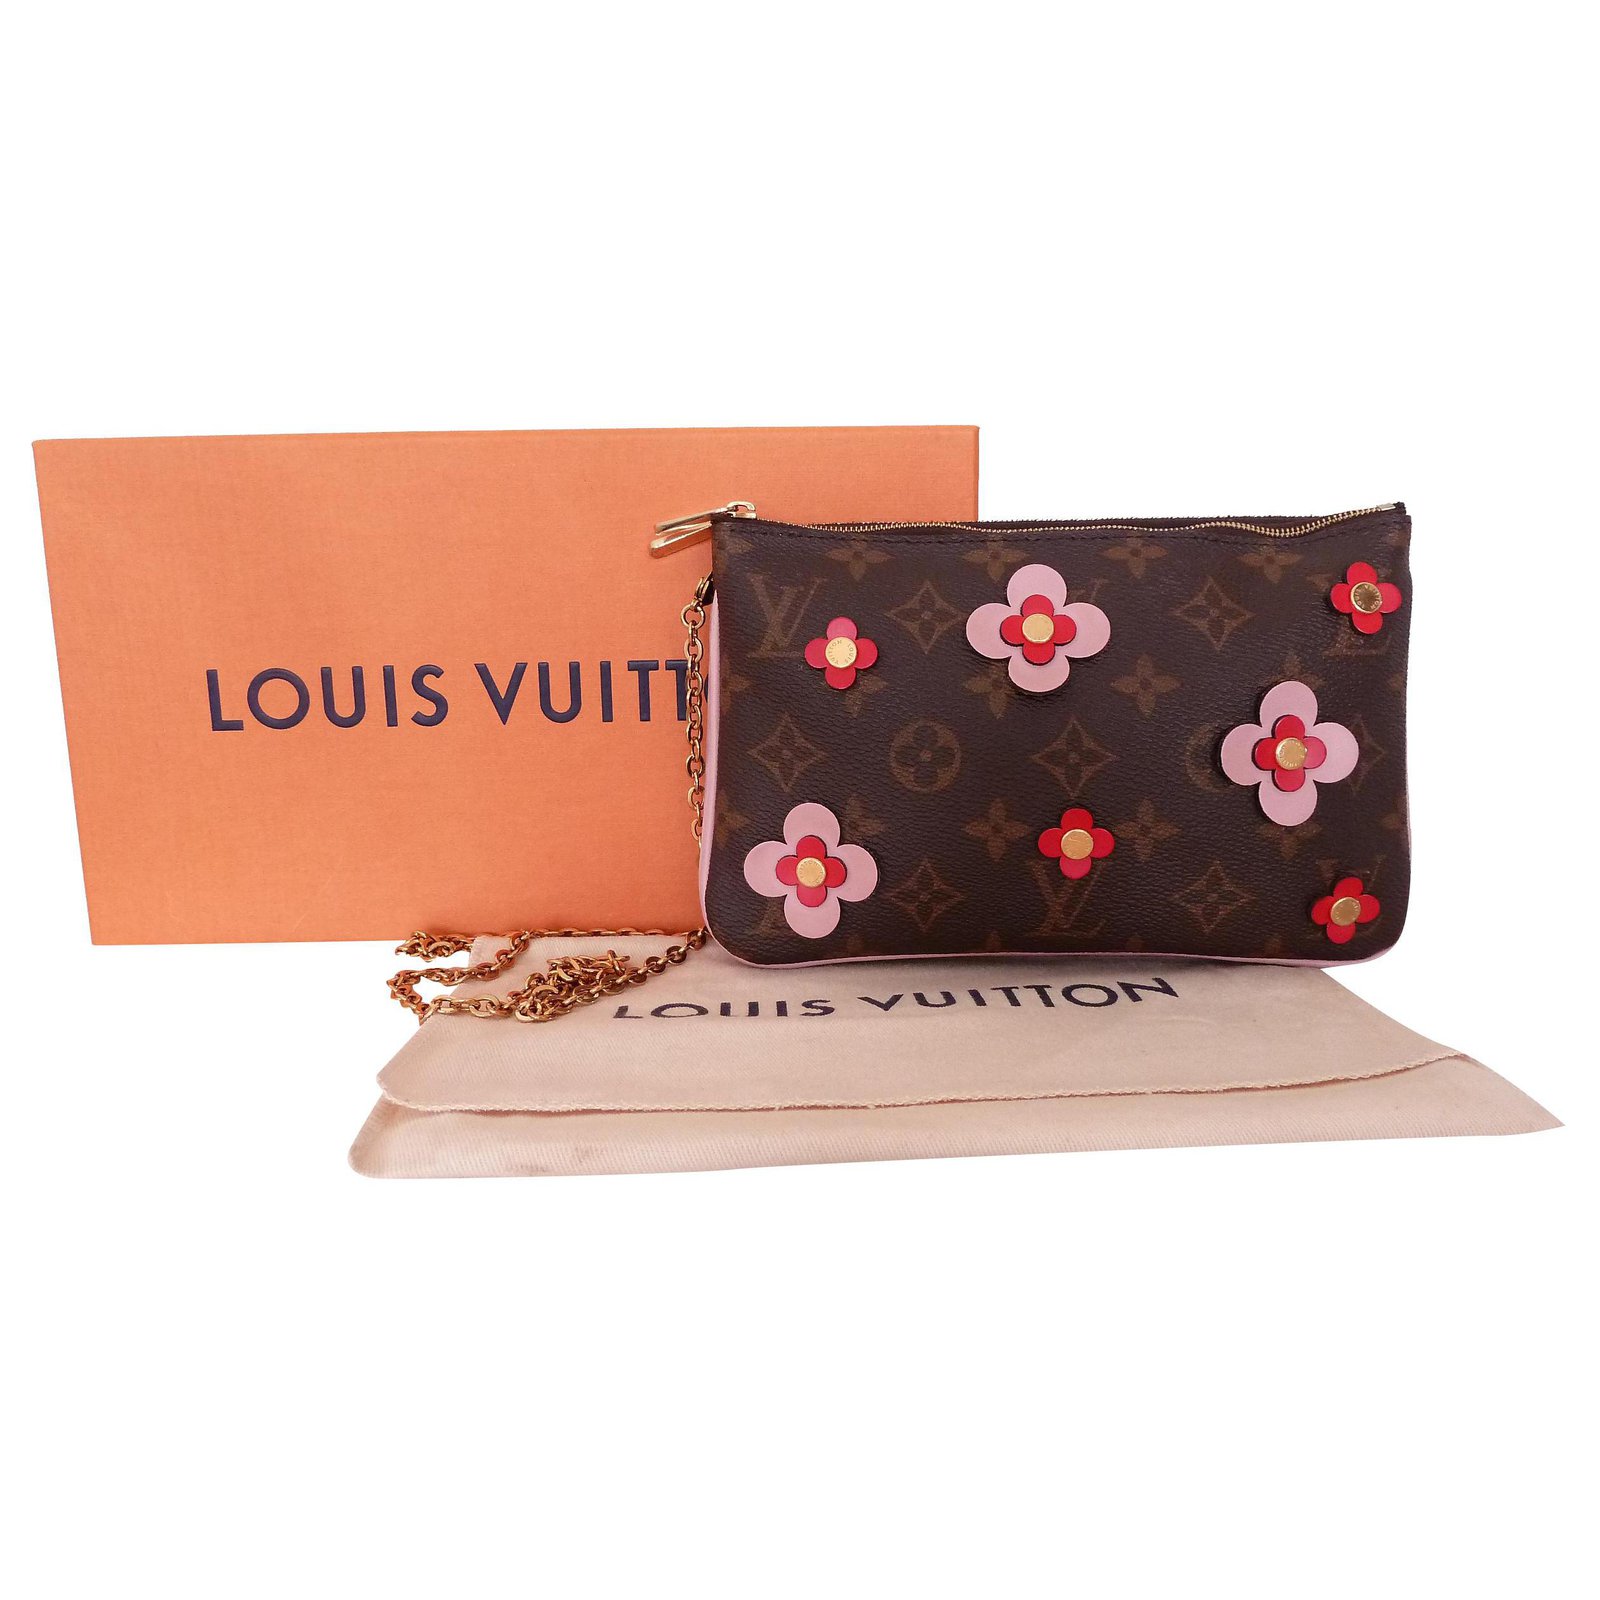 LOUIS VUITTON lined Zip Crafty limited edition clutch bag Multiple